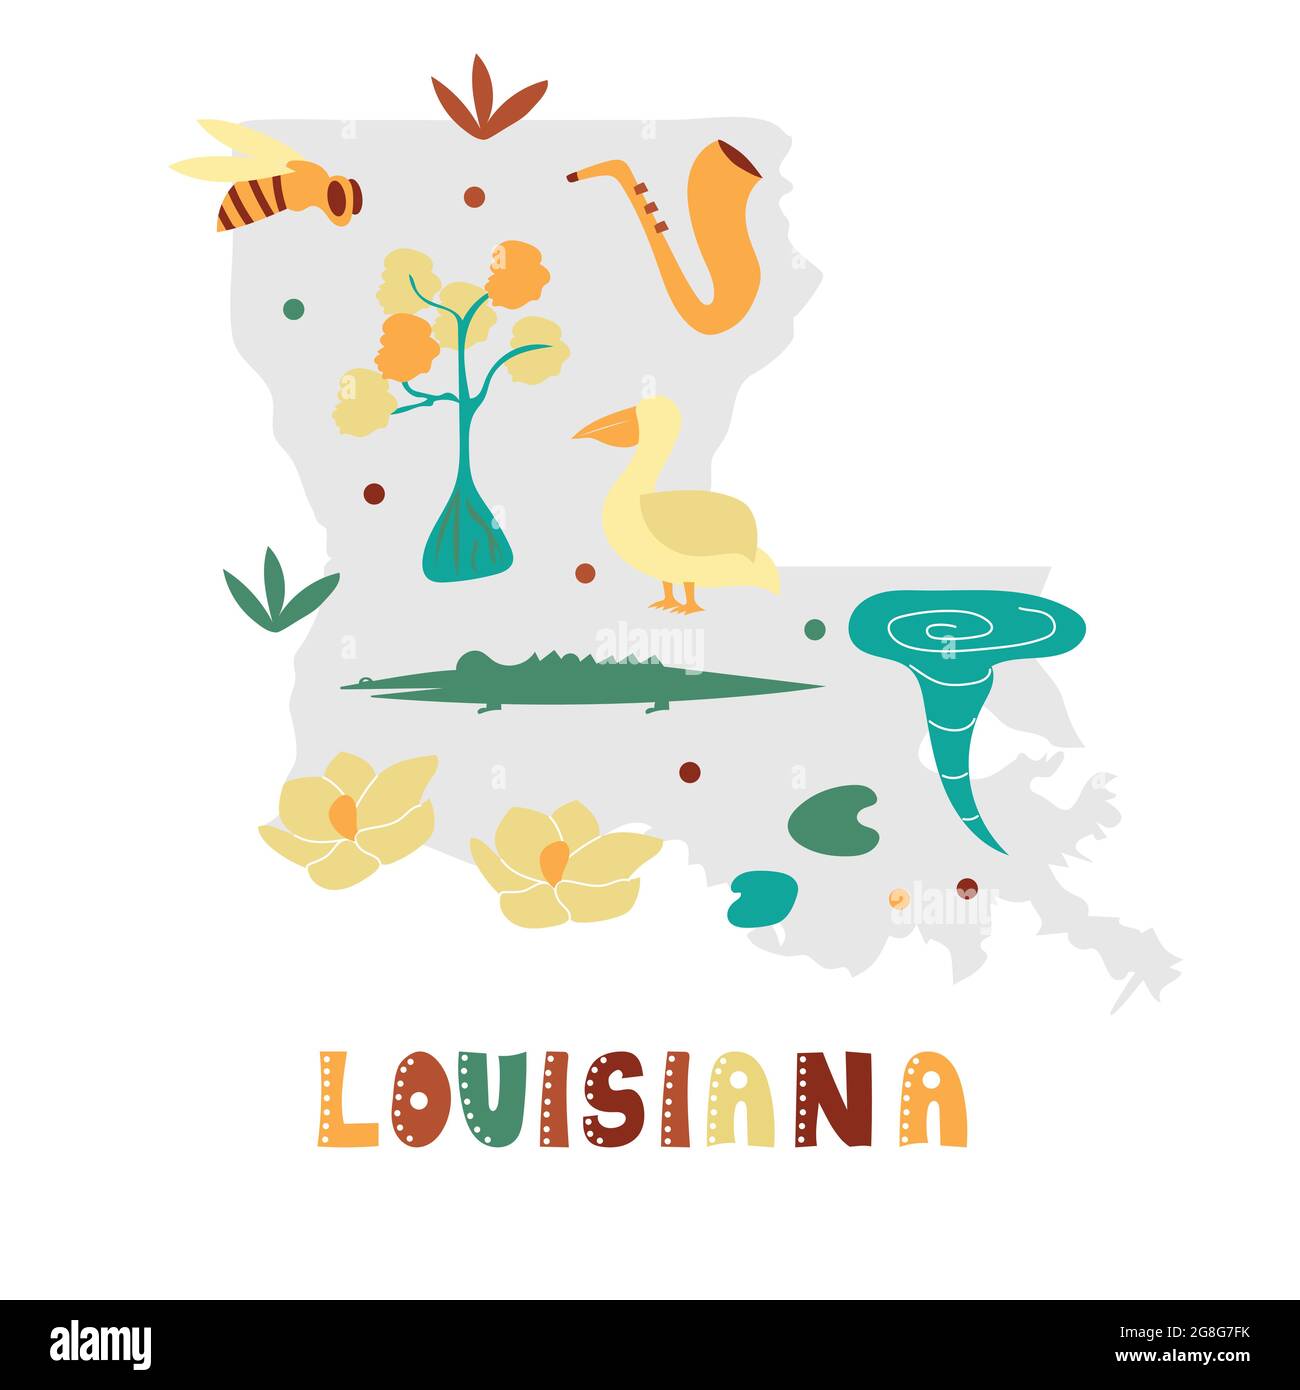 USA map collection. State symbols and nature on gray state silhouette - Louisiana. Cartoon simple style for print Stock Vector